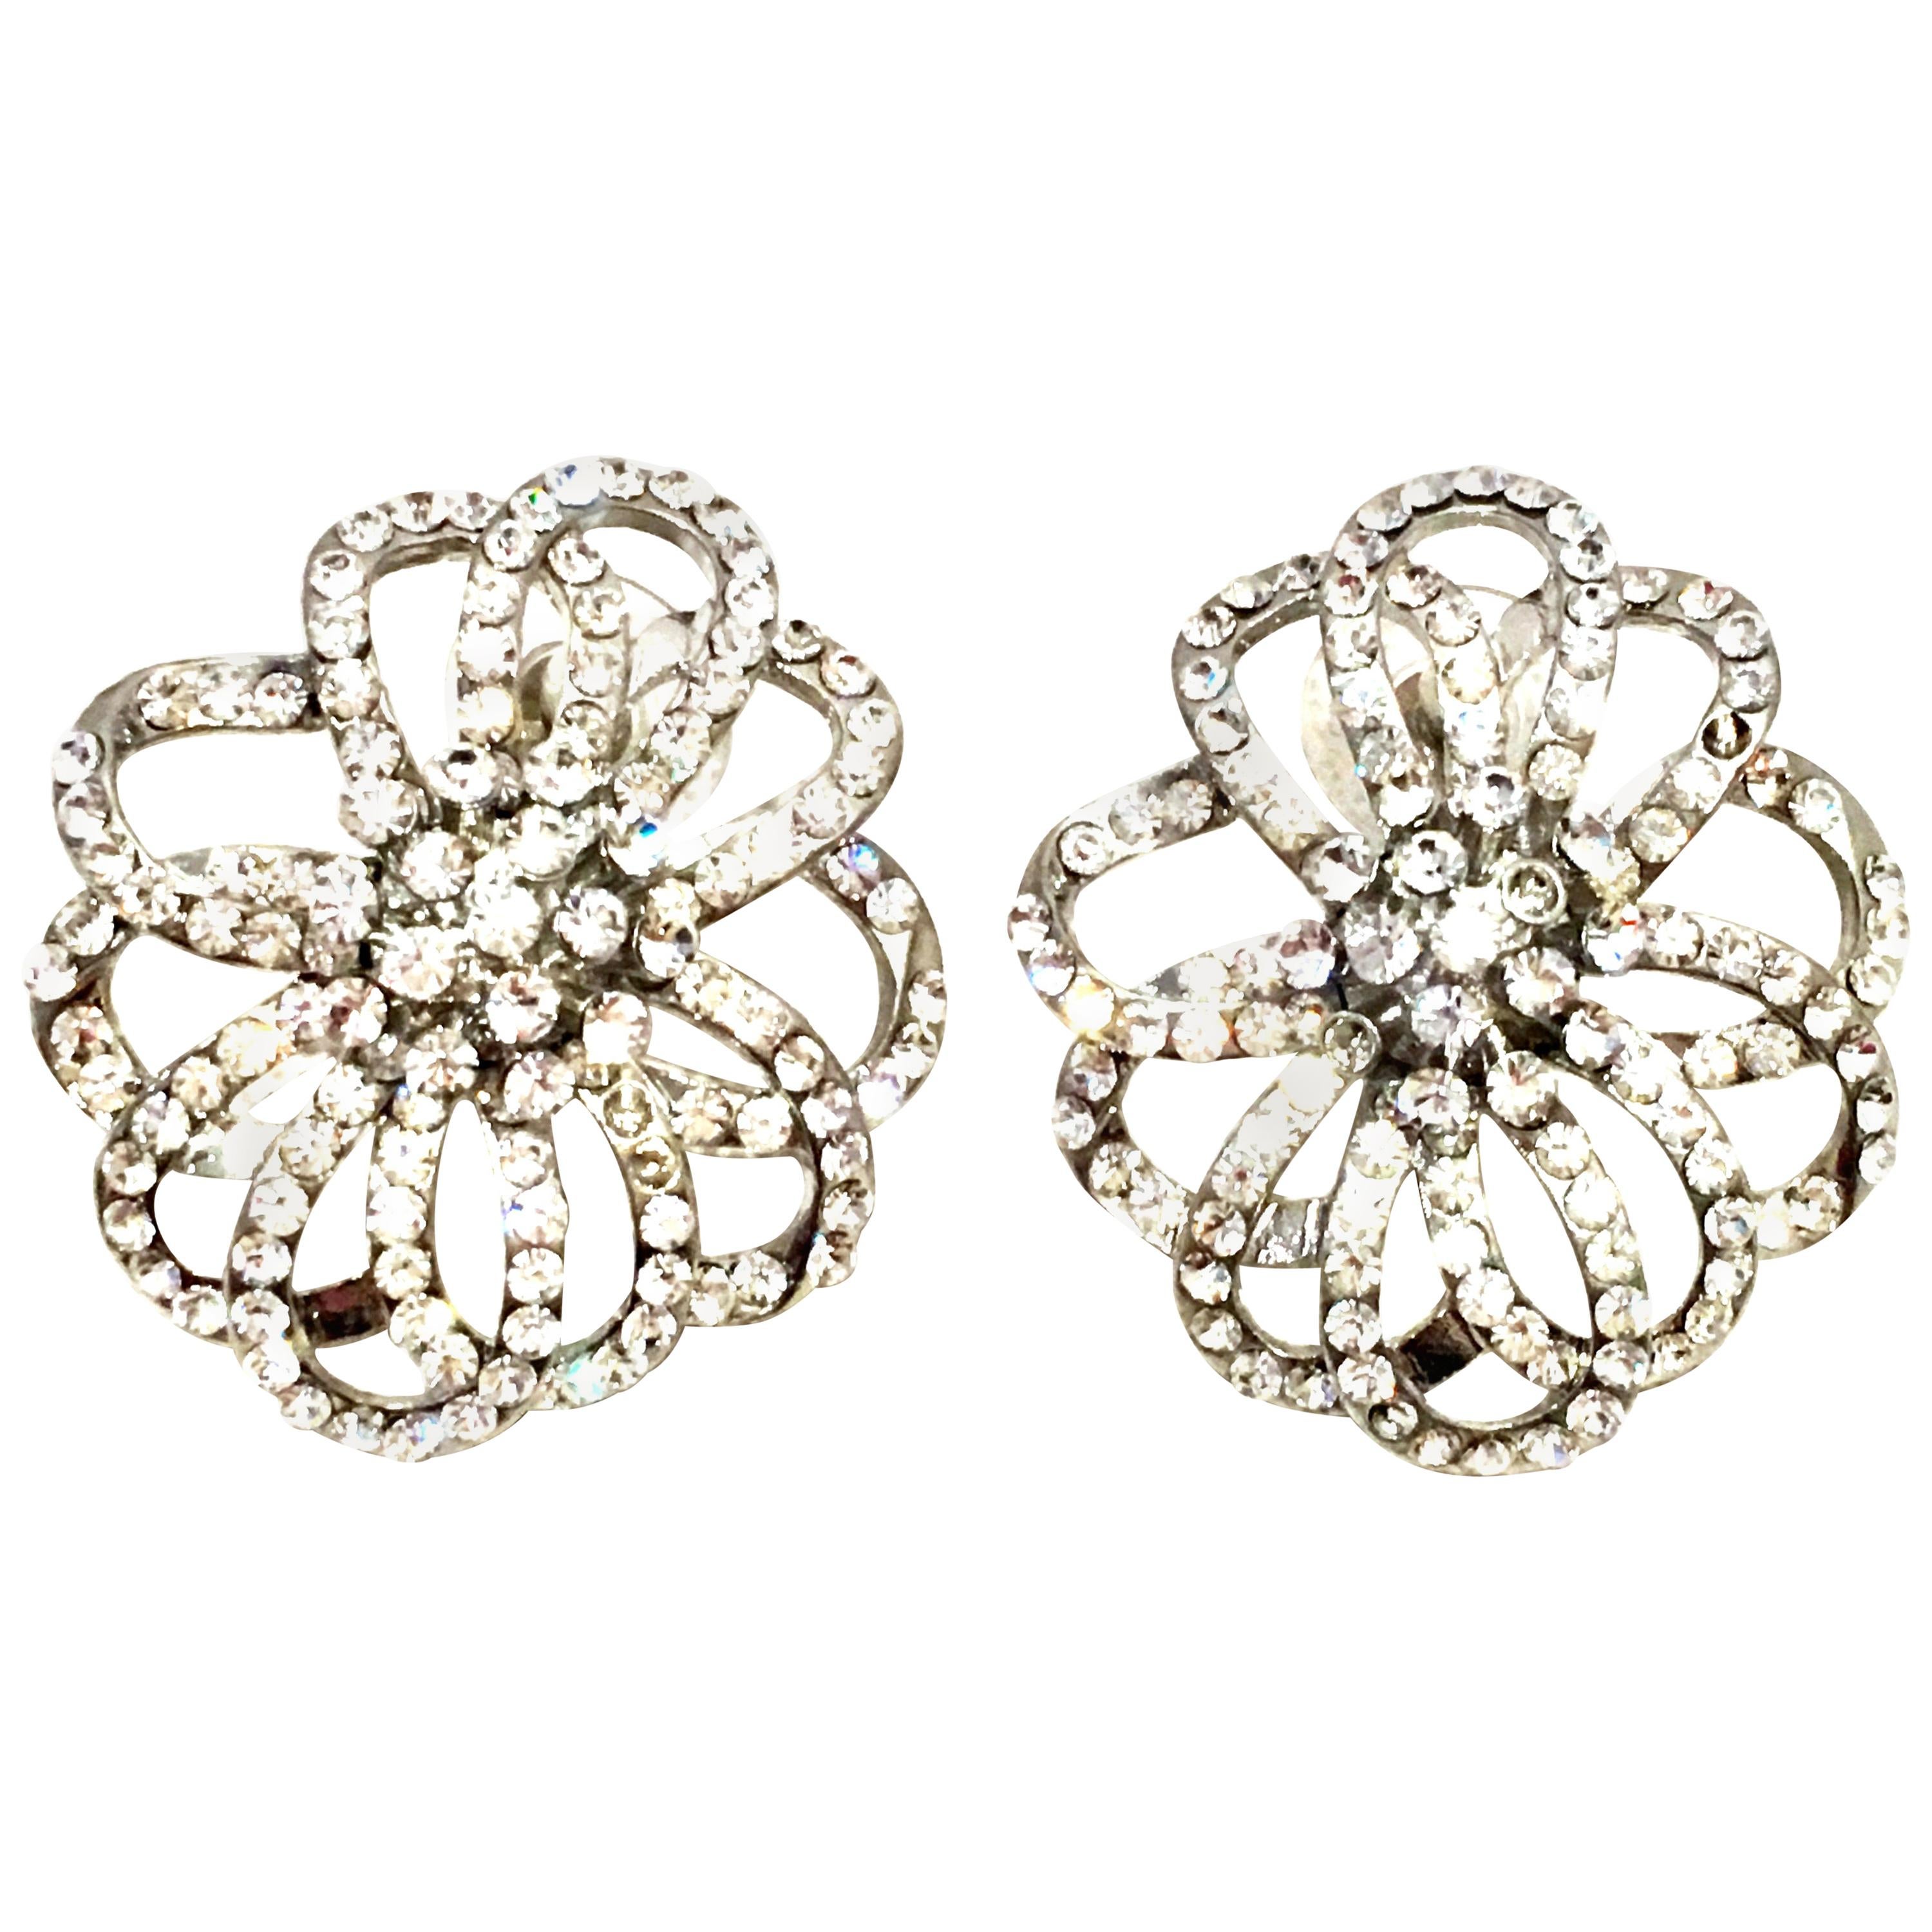 20th Century Silver & Crystal Dimensional Floral Earrings By, Swarovski For Sale